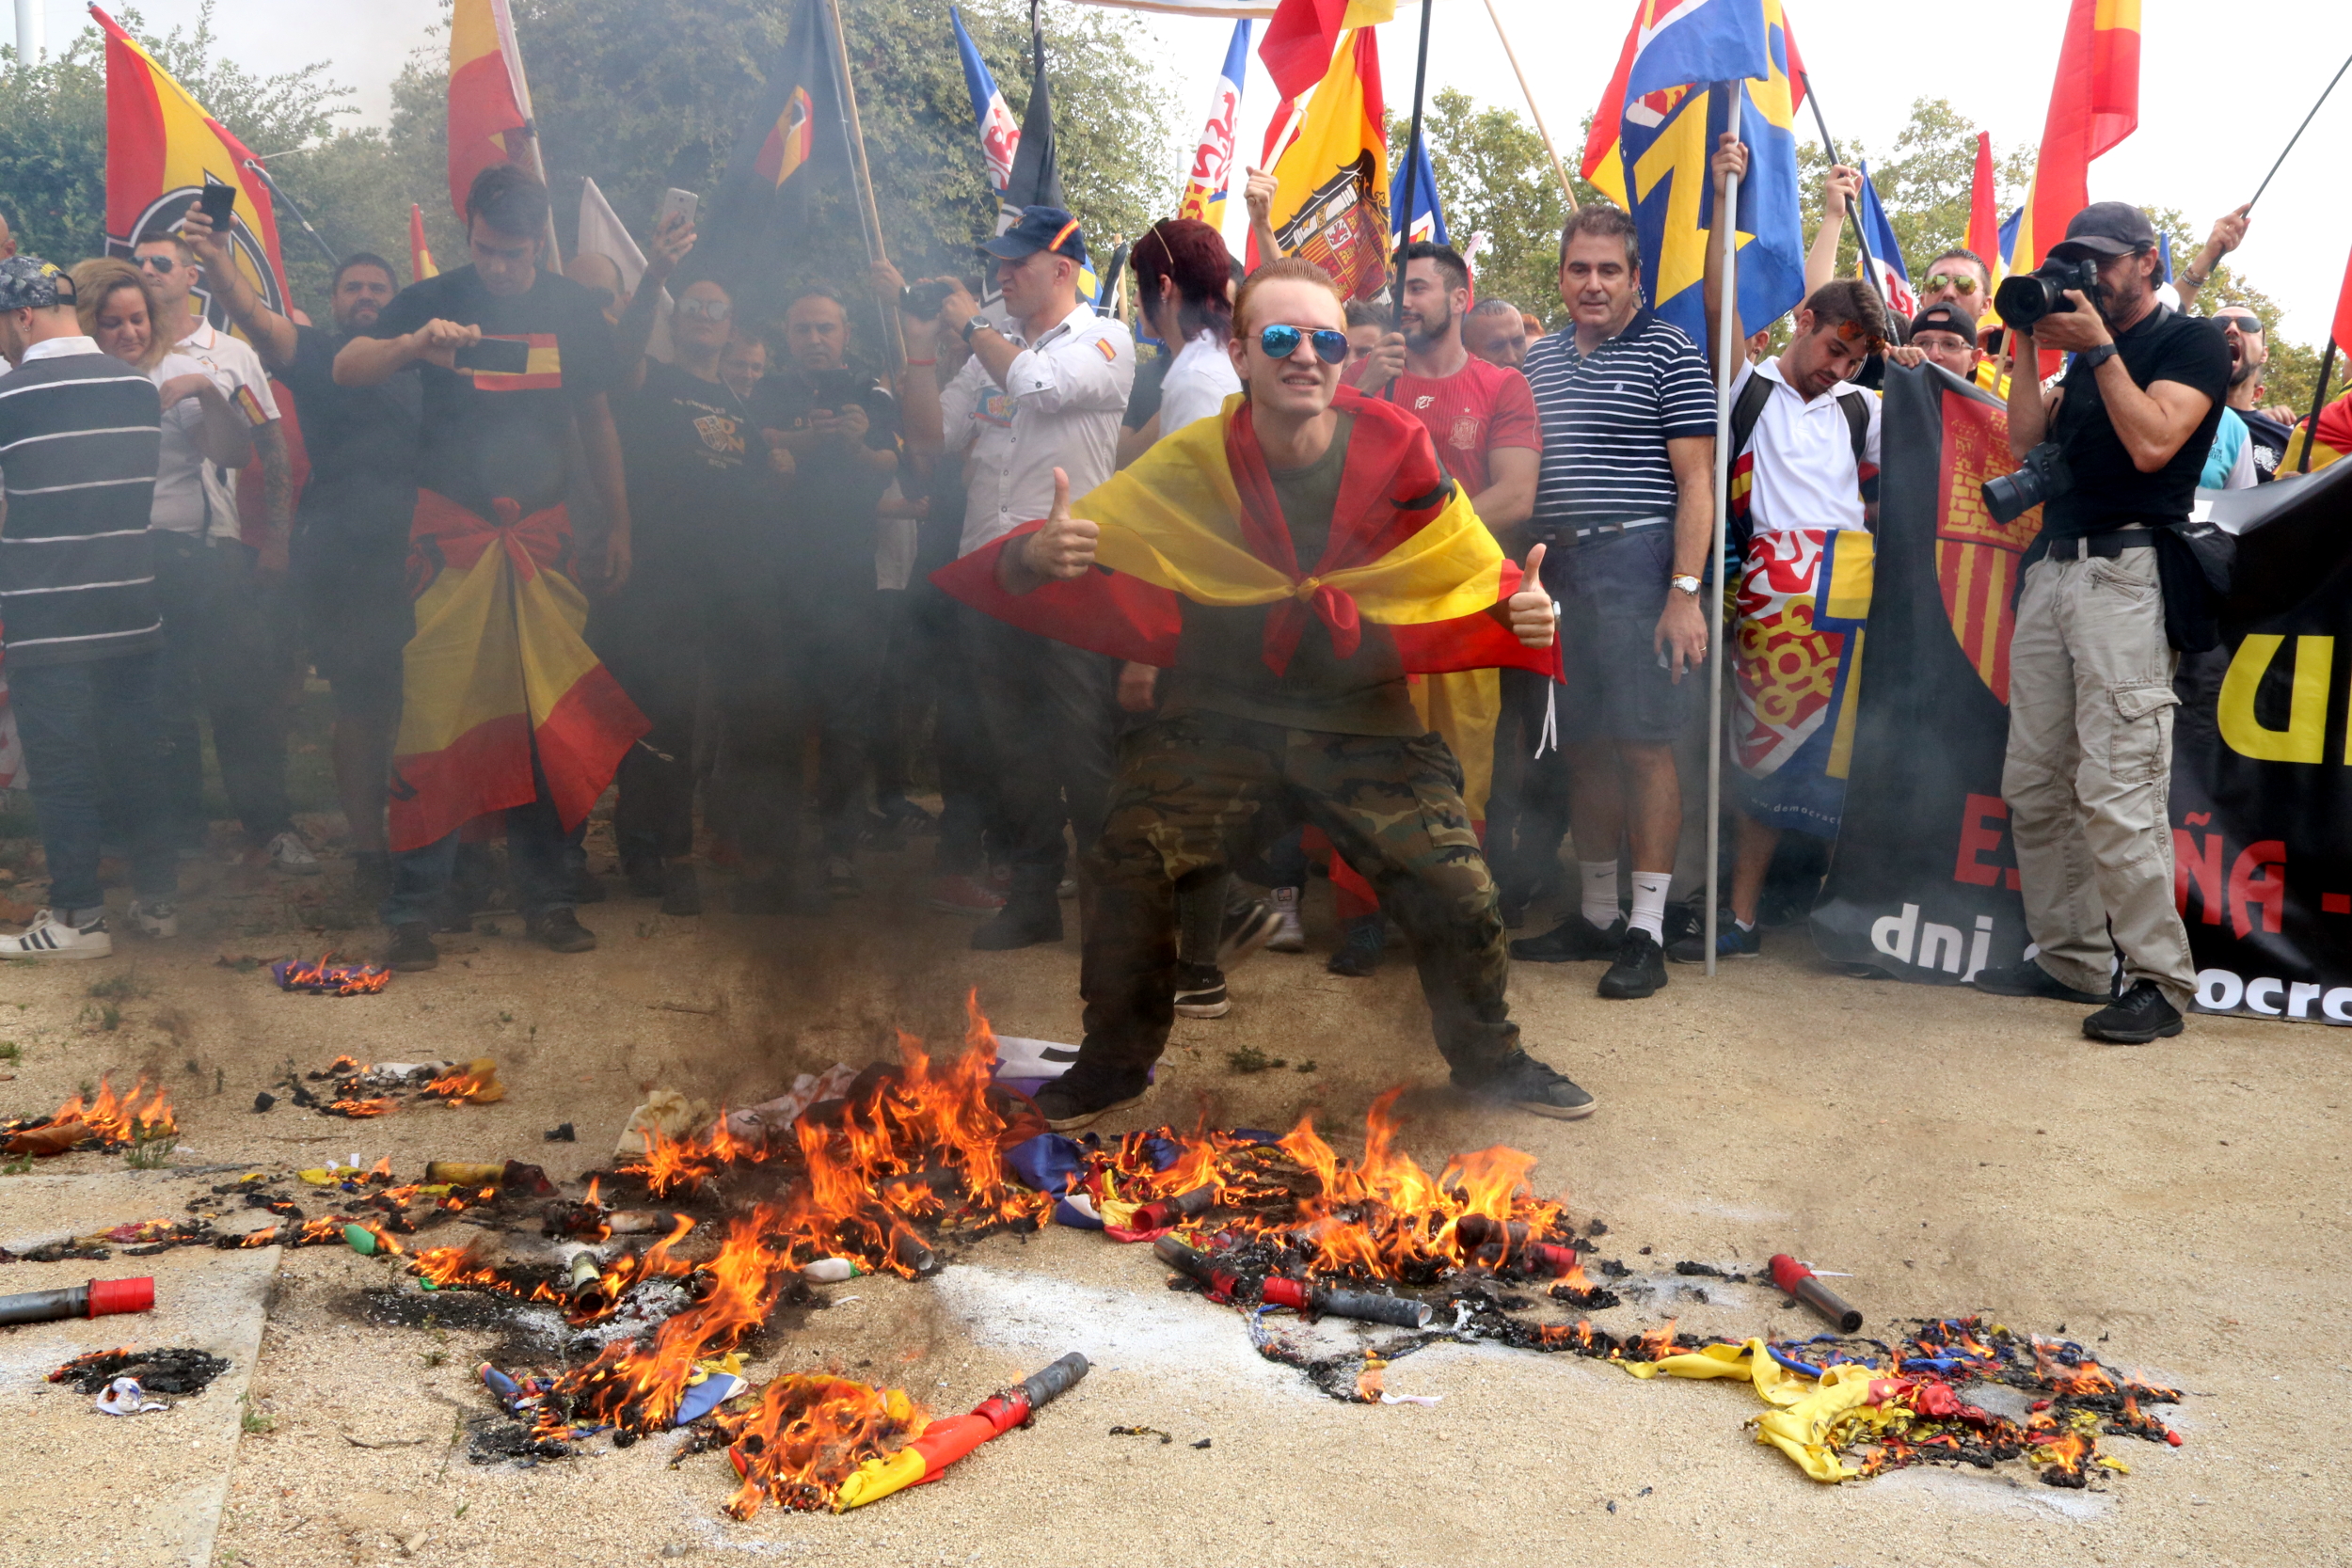 Far-right demonstrators burn a pro-independence flag (by Josep Molina)